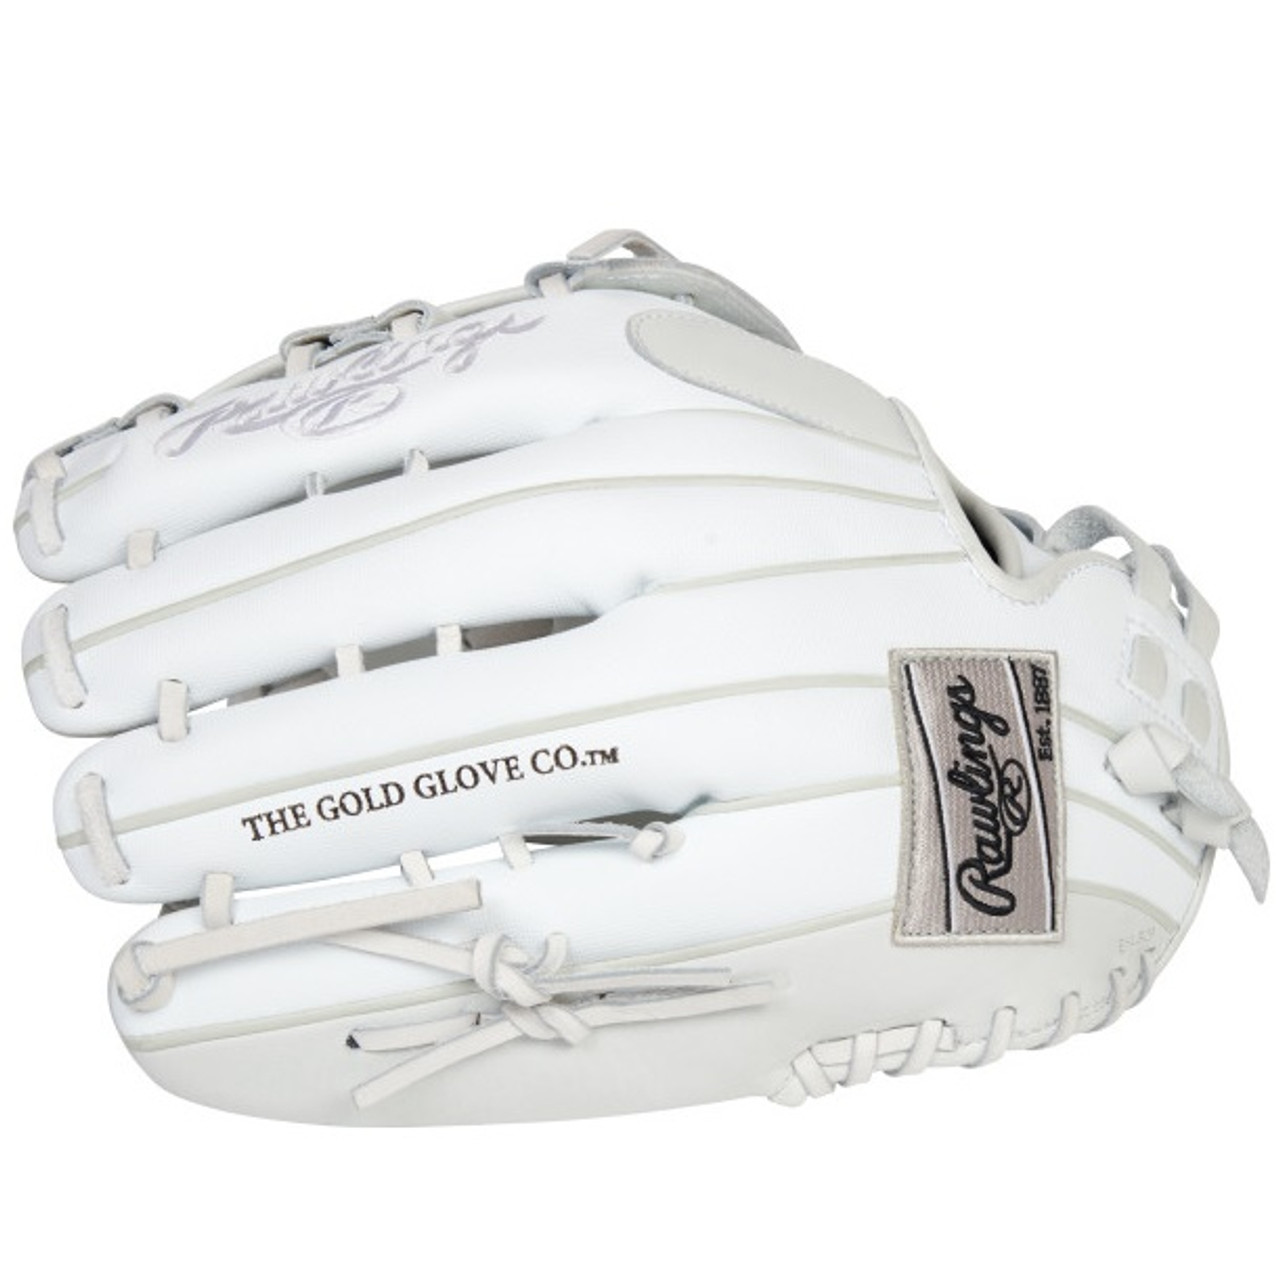 RAWLINGS LIBERTY ADVANCED COLOR SERIES 12.75-INCH OUTFIELD GLOVE